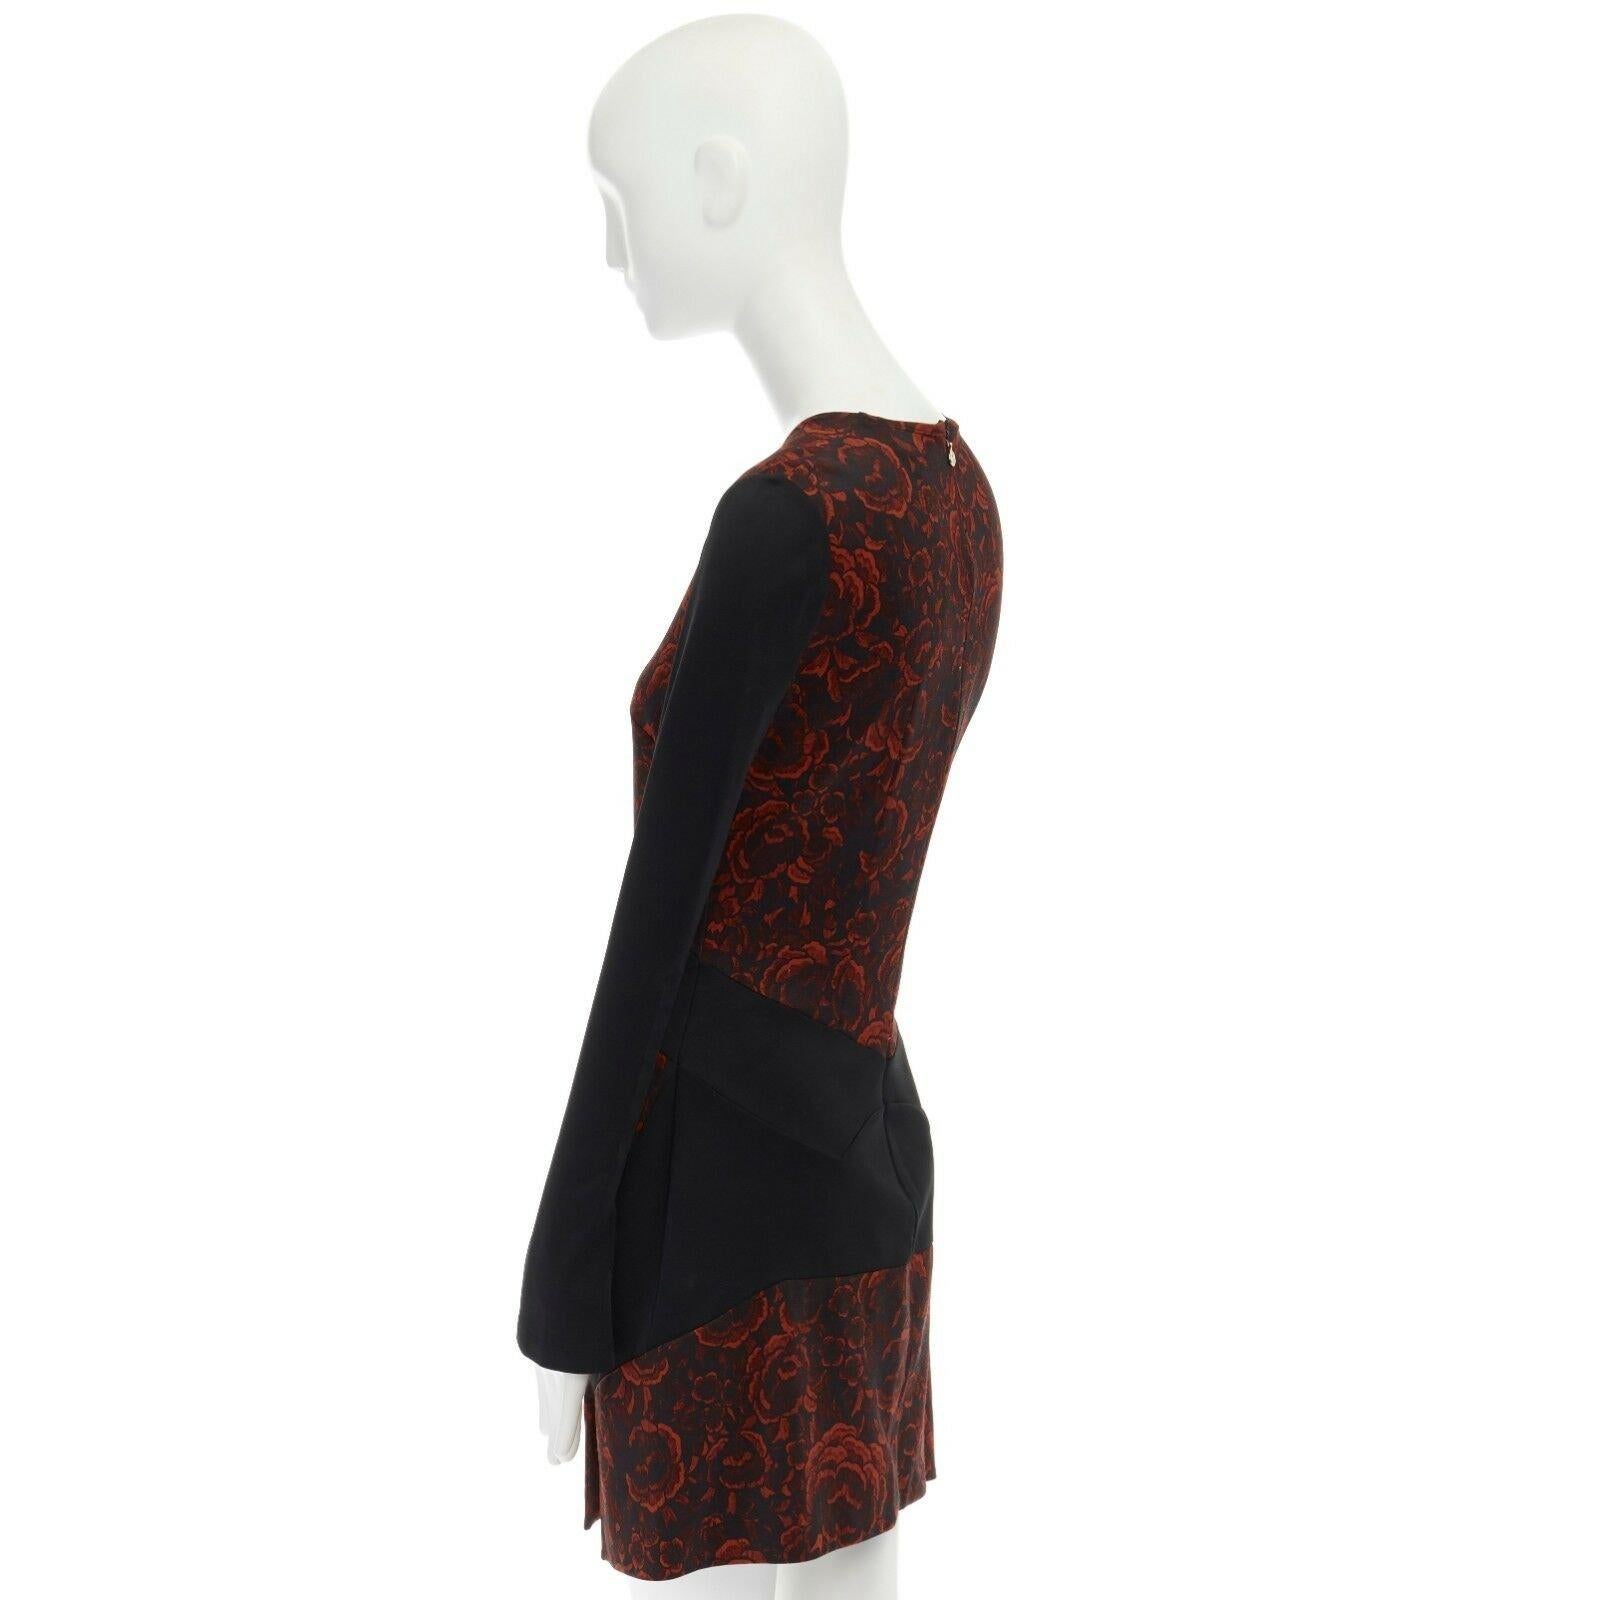 JUST CAVALLI red floral print black panelled dual slit bodycon cocktail dress S 1